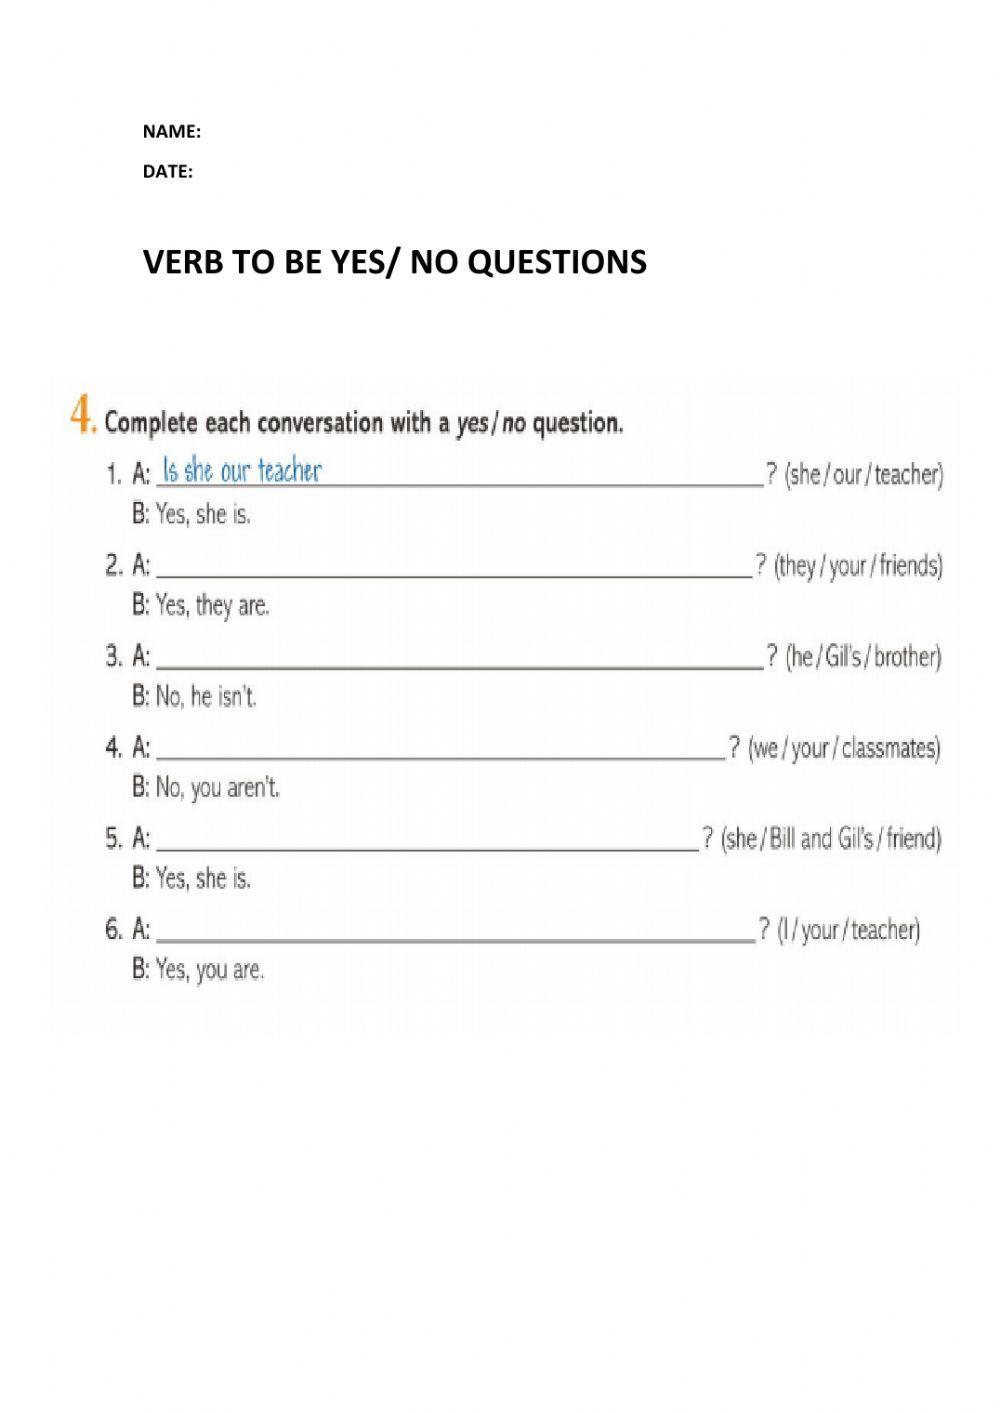 VERB TO BE YES-NO questions